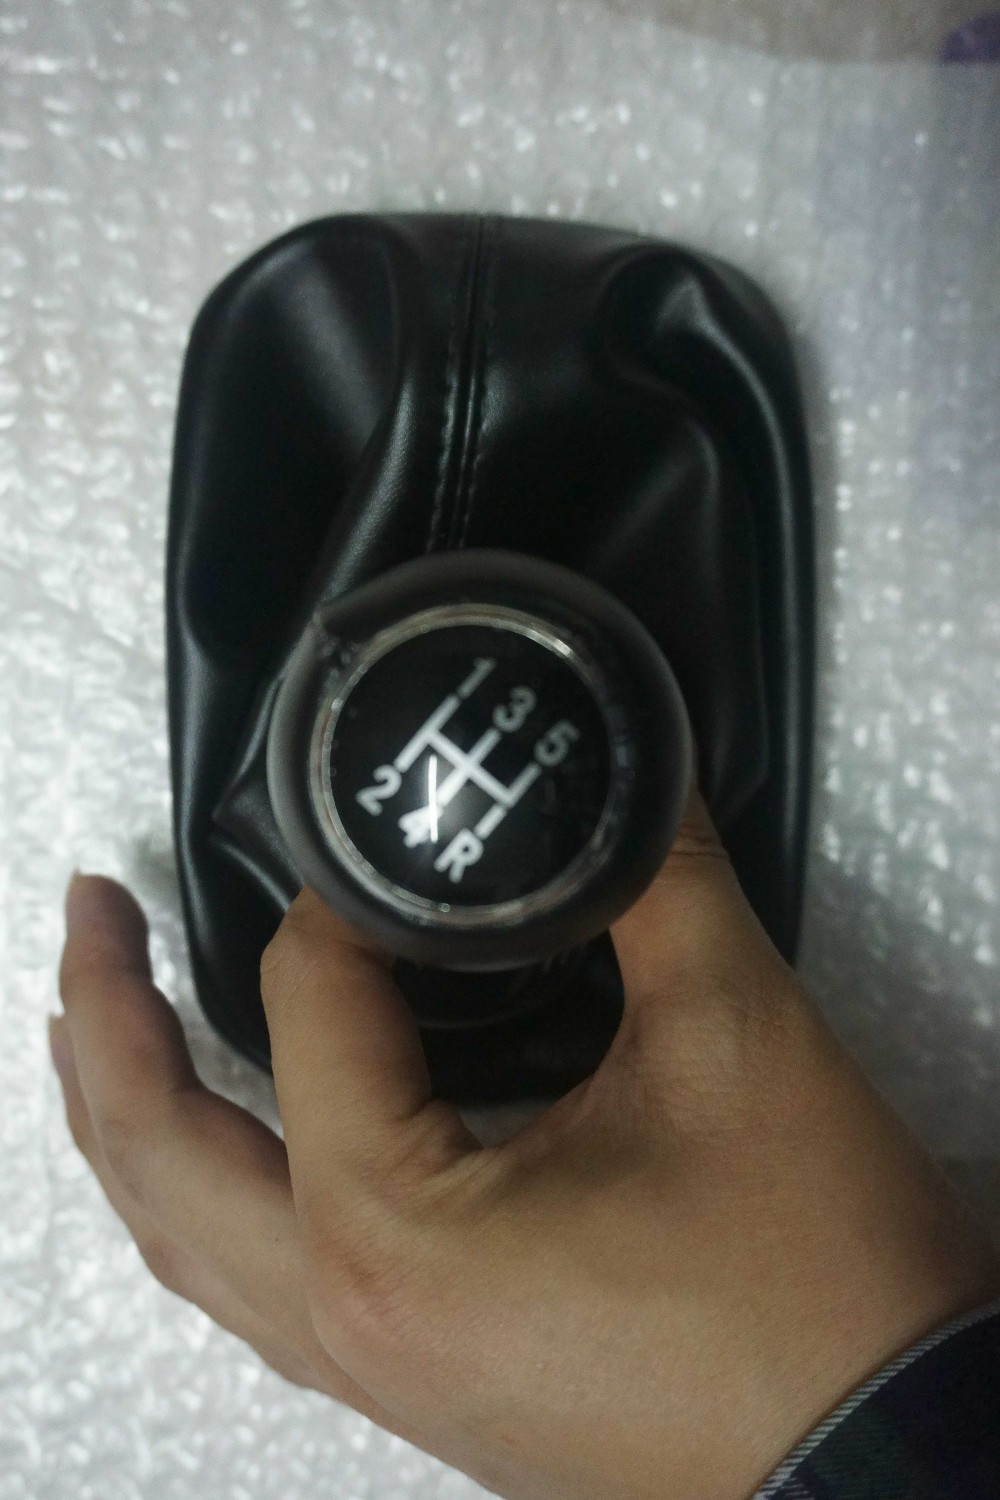 wholesale price 5 Speed Car Shift Gear Knob Lever Gaitor Boot Cover for Audi A6 C5 A4 B5 A8 D2 1996-2003